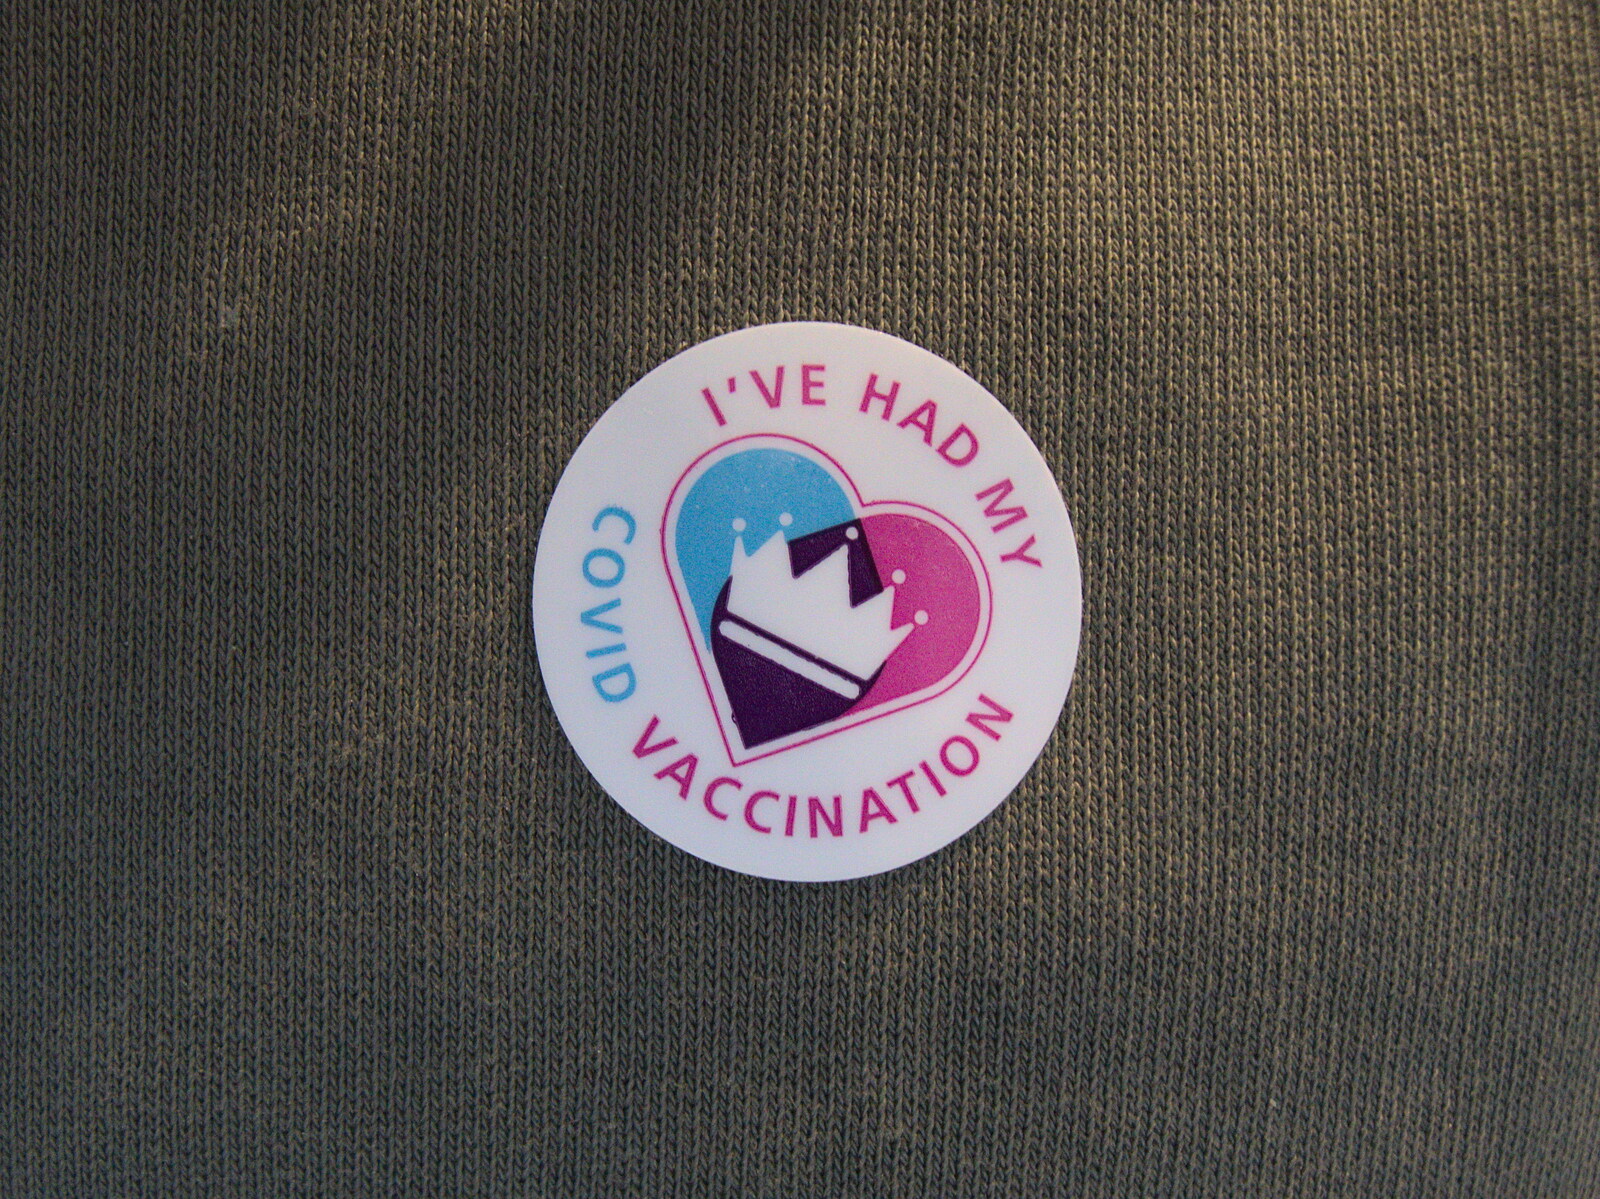 Nosher gets a vaccination sticker from A Vaccine Postcard from Harleston, Norfolk - 22nd March 2021